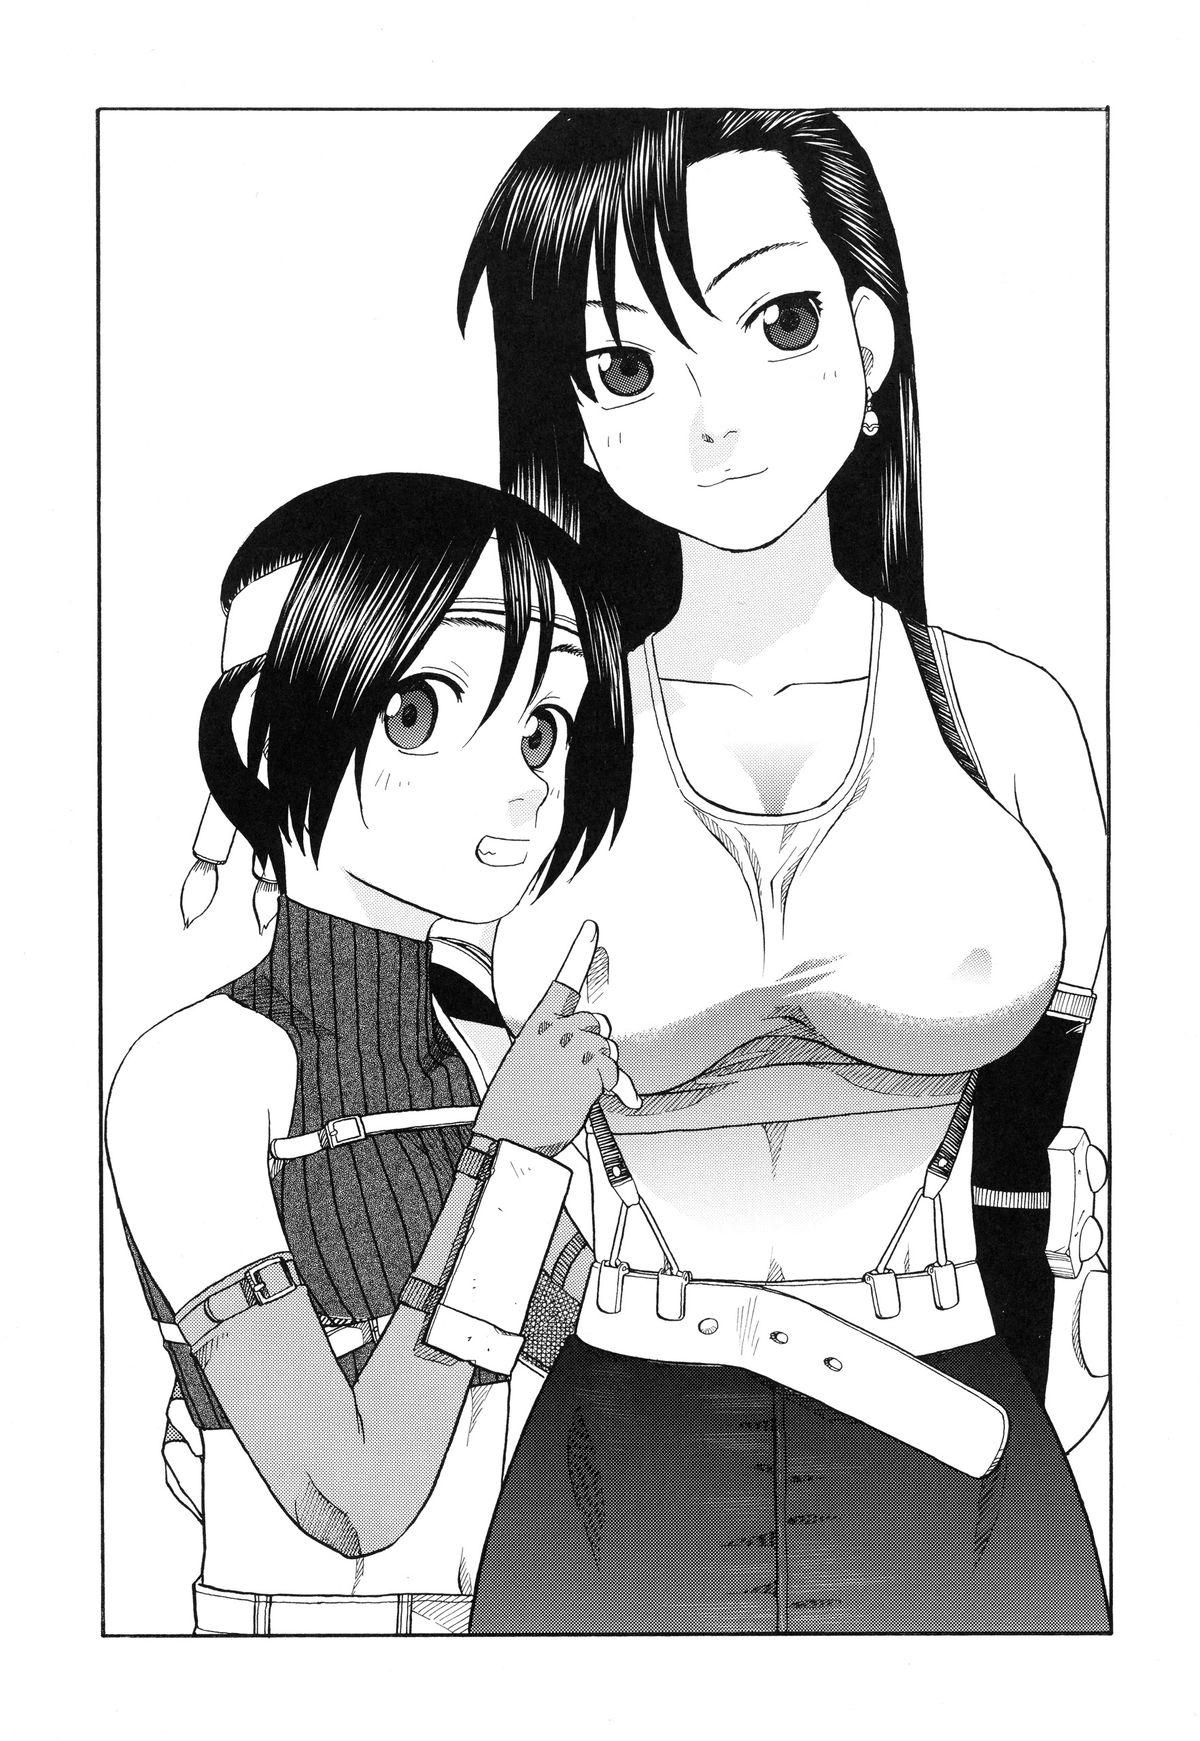 Booty Tifa to Yuffie to Yojouhan - Final fantasy vii Sentones - Page 3